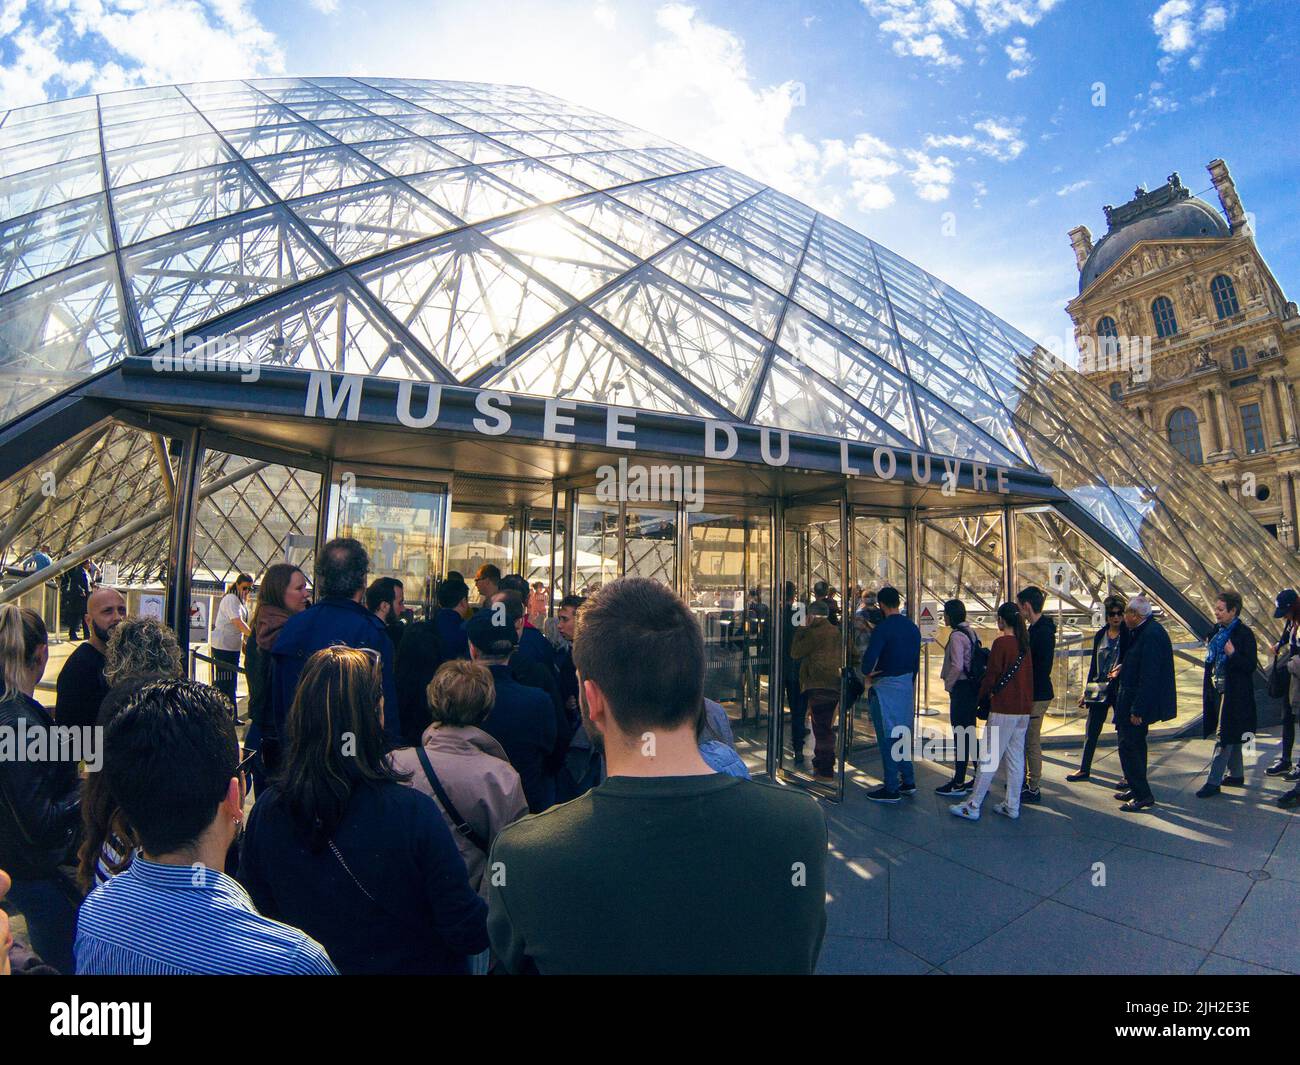 PARIS, FRANCE -APRIL 8, 2018:  The Louvre or the Louvre Museum is the world's largest art museum and a historic monument in Paris, France. Stock Photo